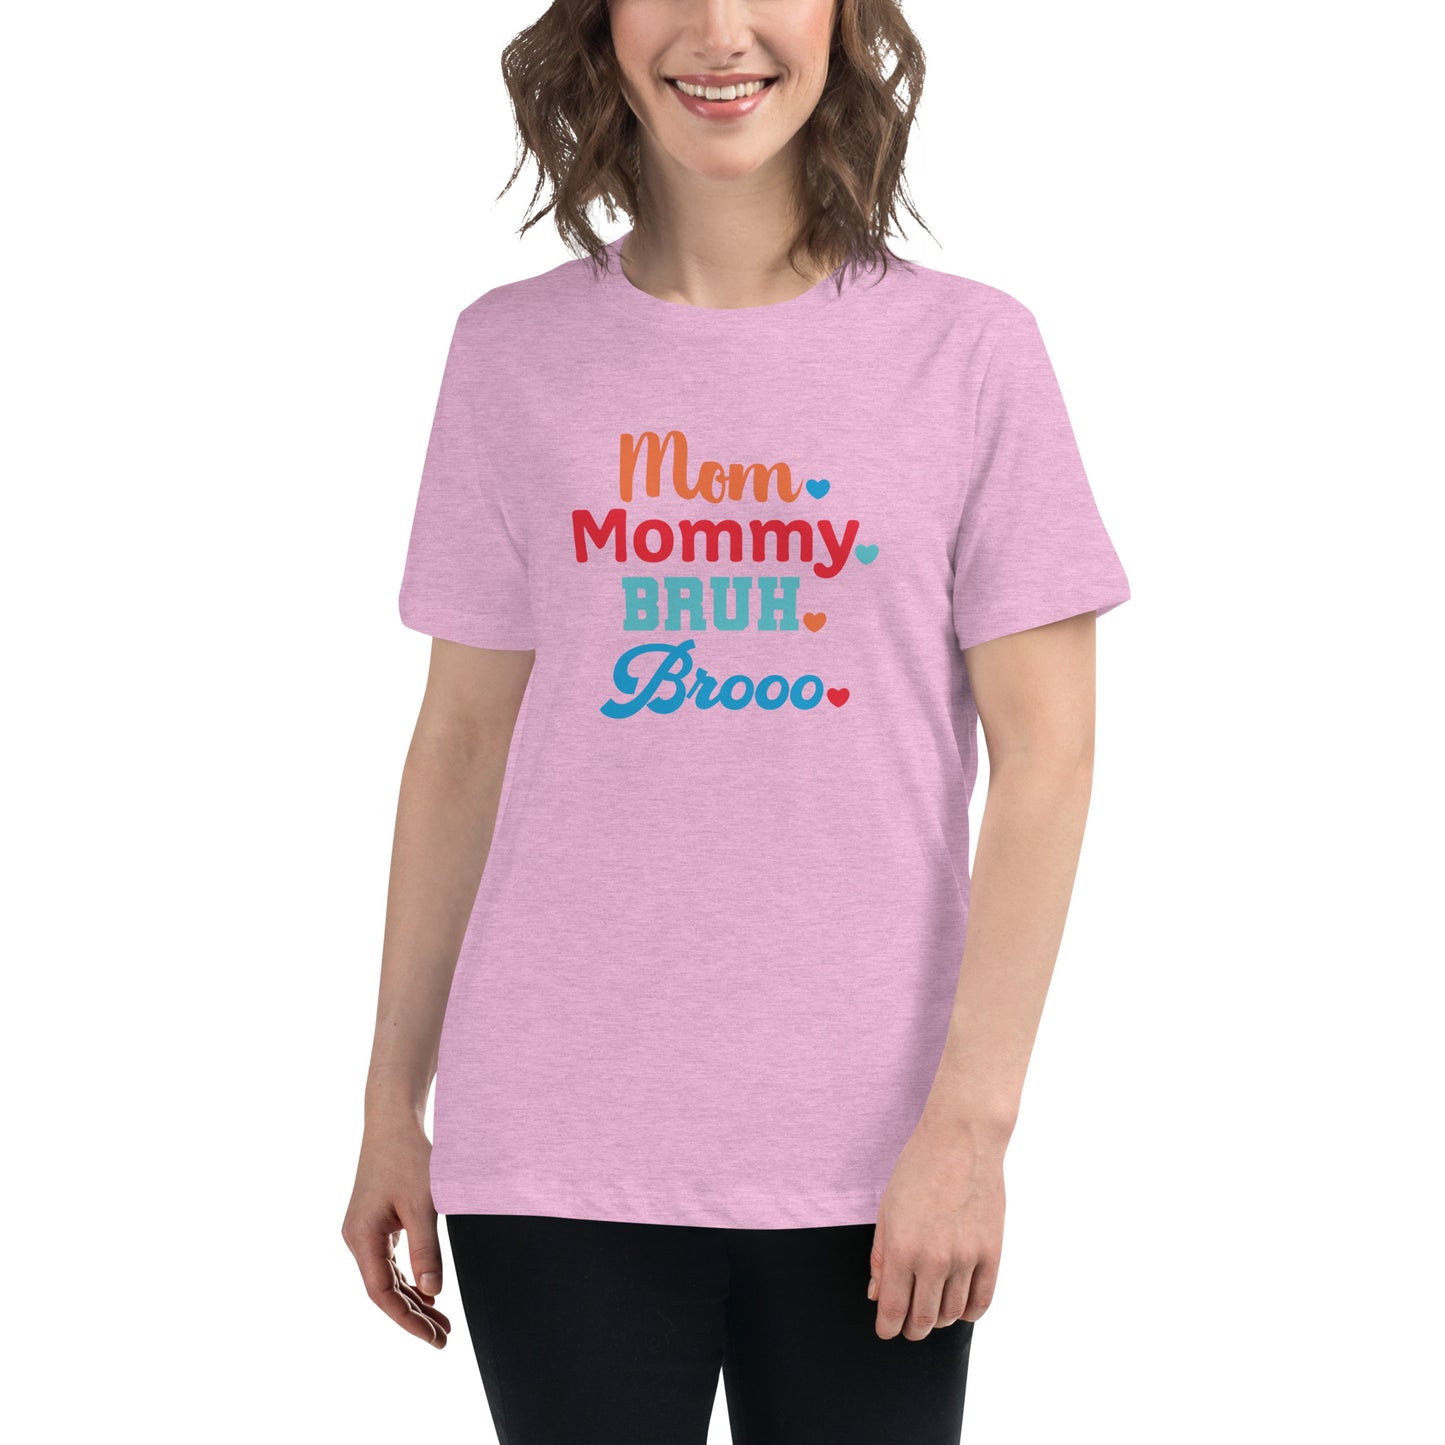 Mom, Mommy, Bruh, Broo Women's Relaxed T-Shirt